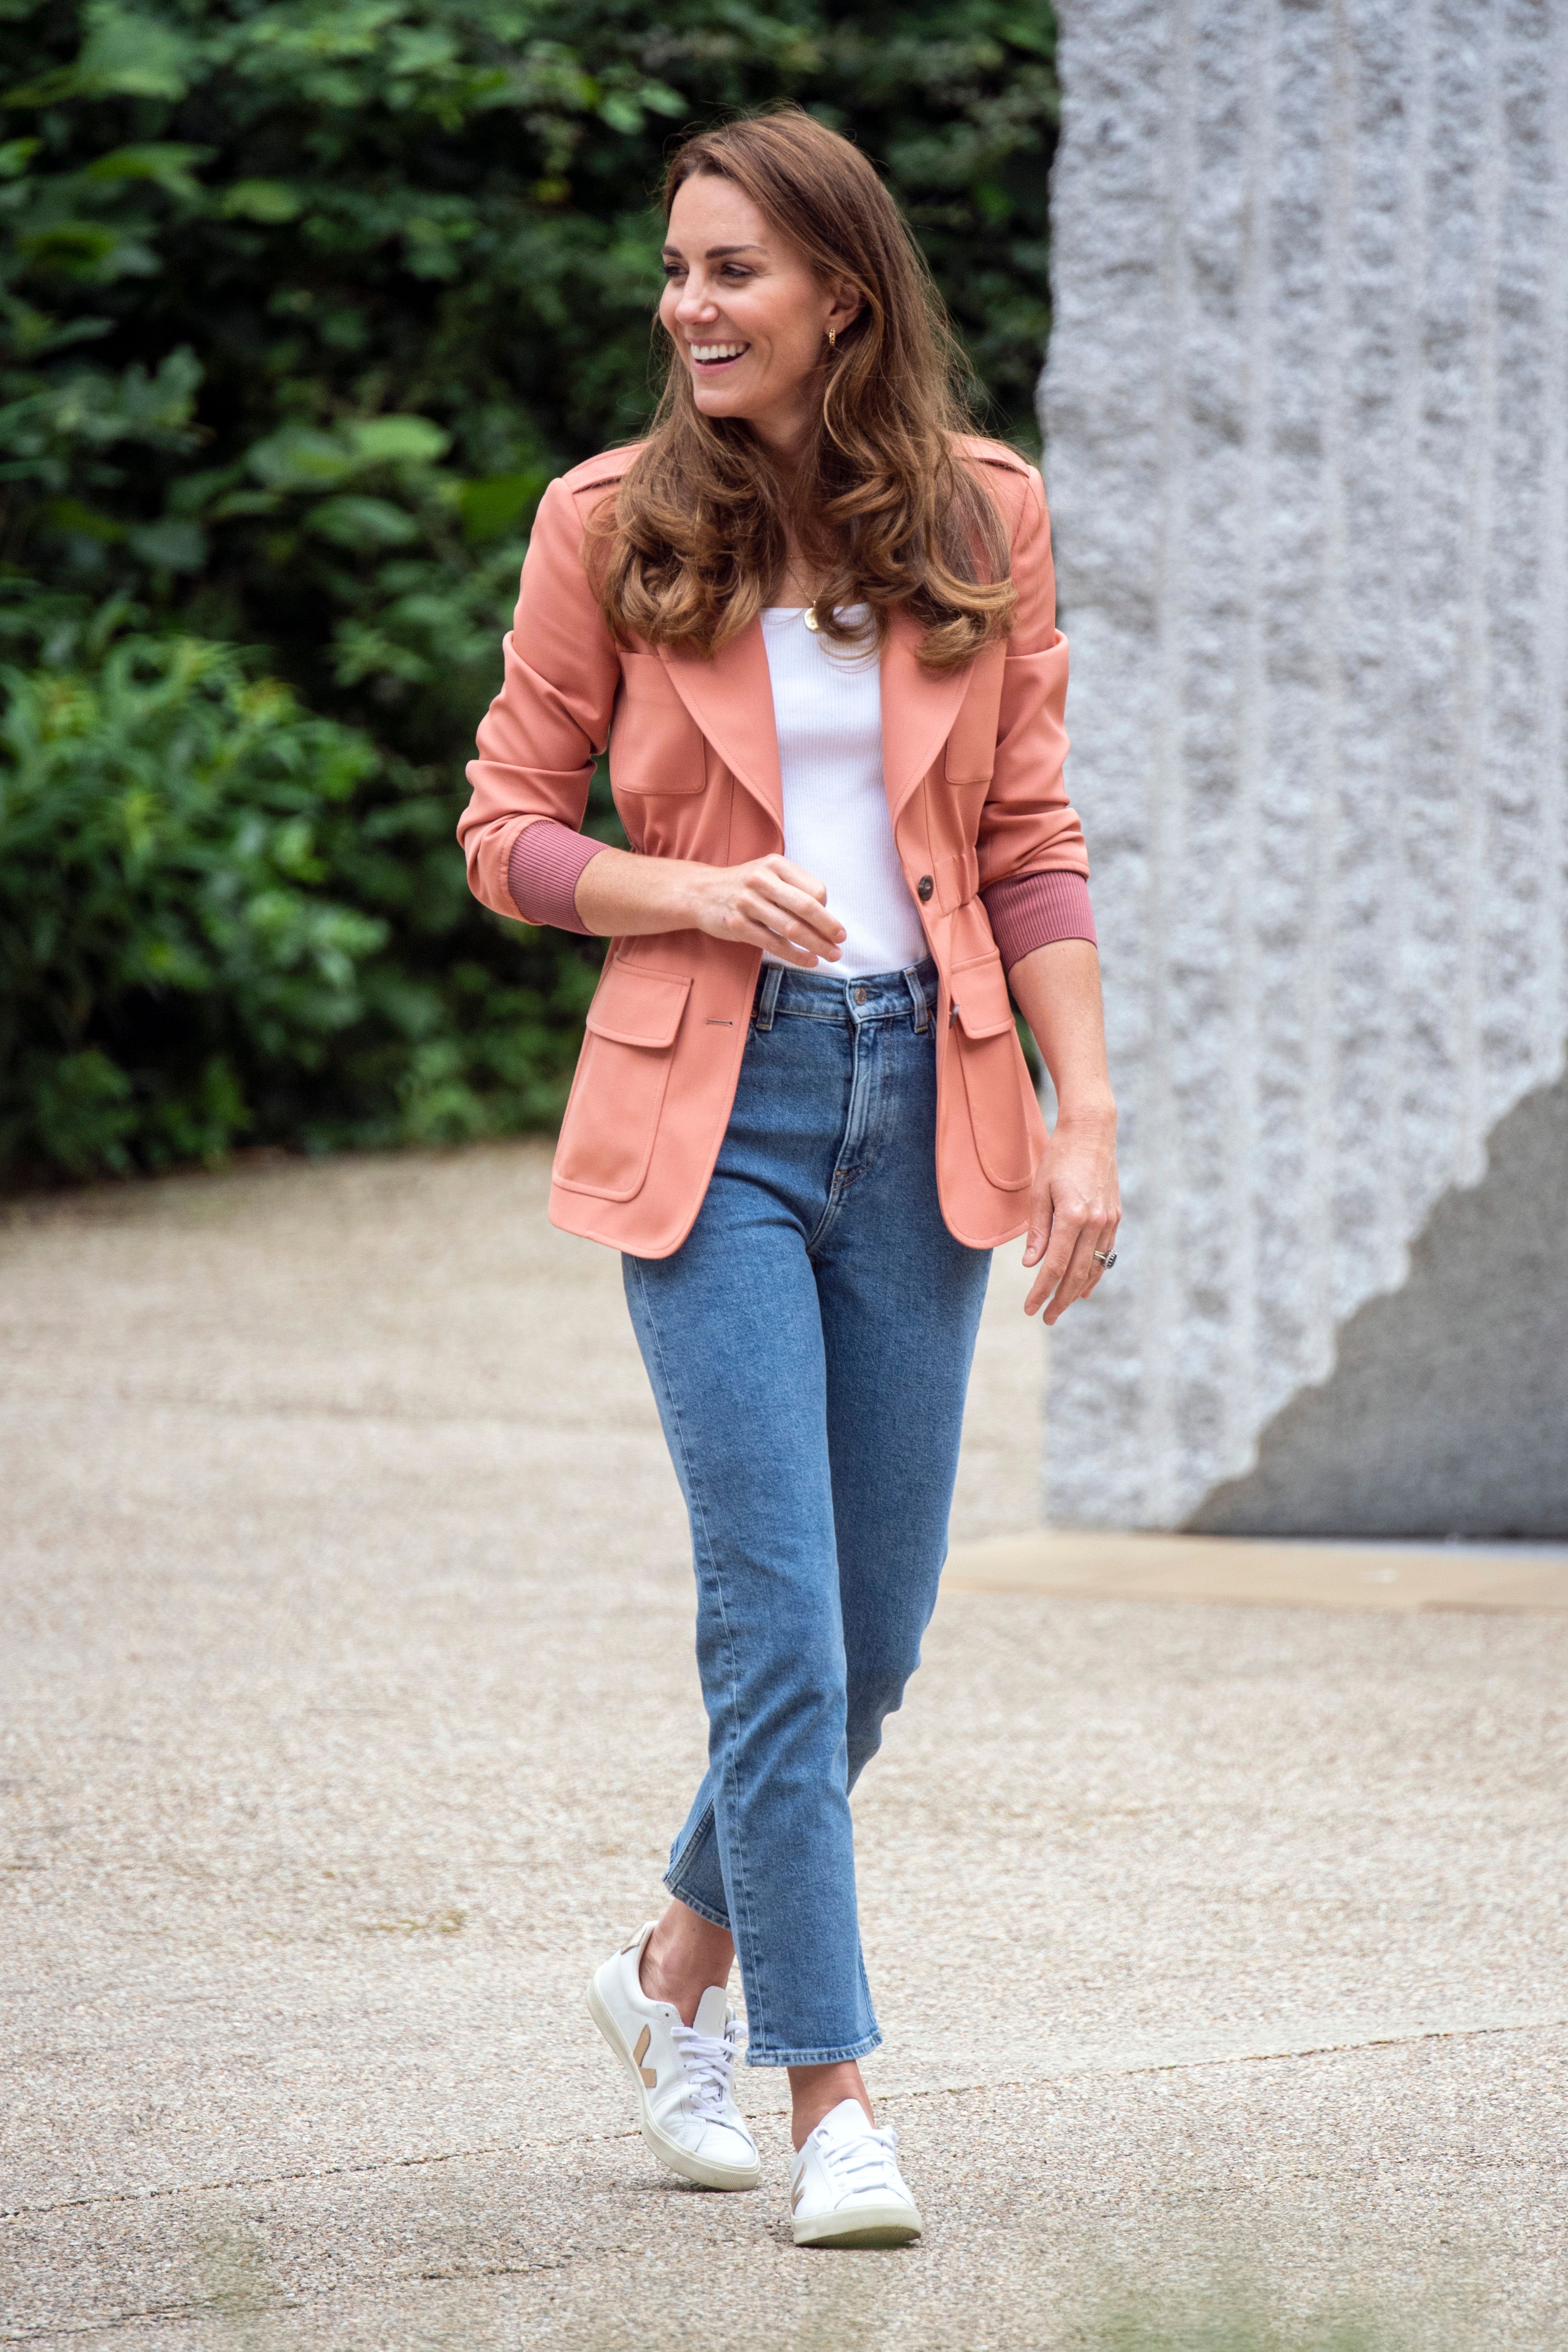 Duchess Middleton in Skinny Jeans: Photos of the